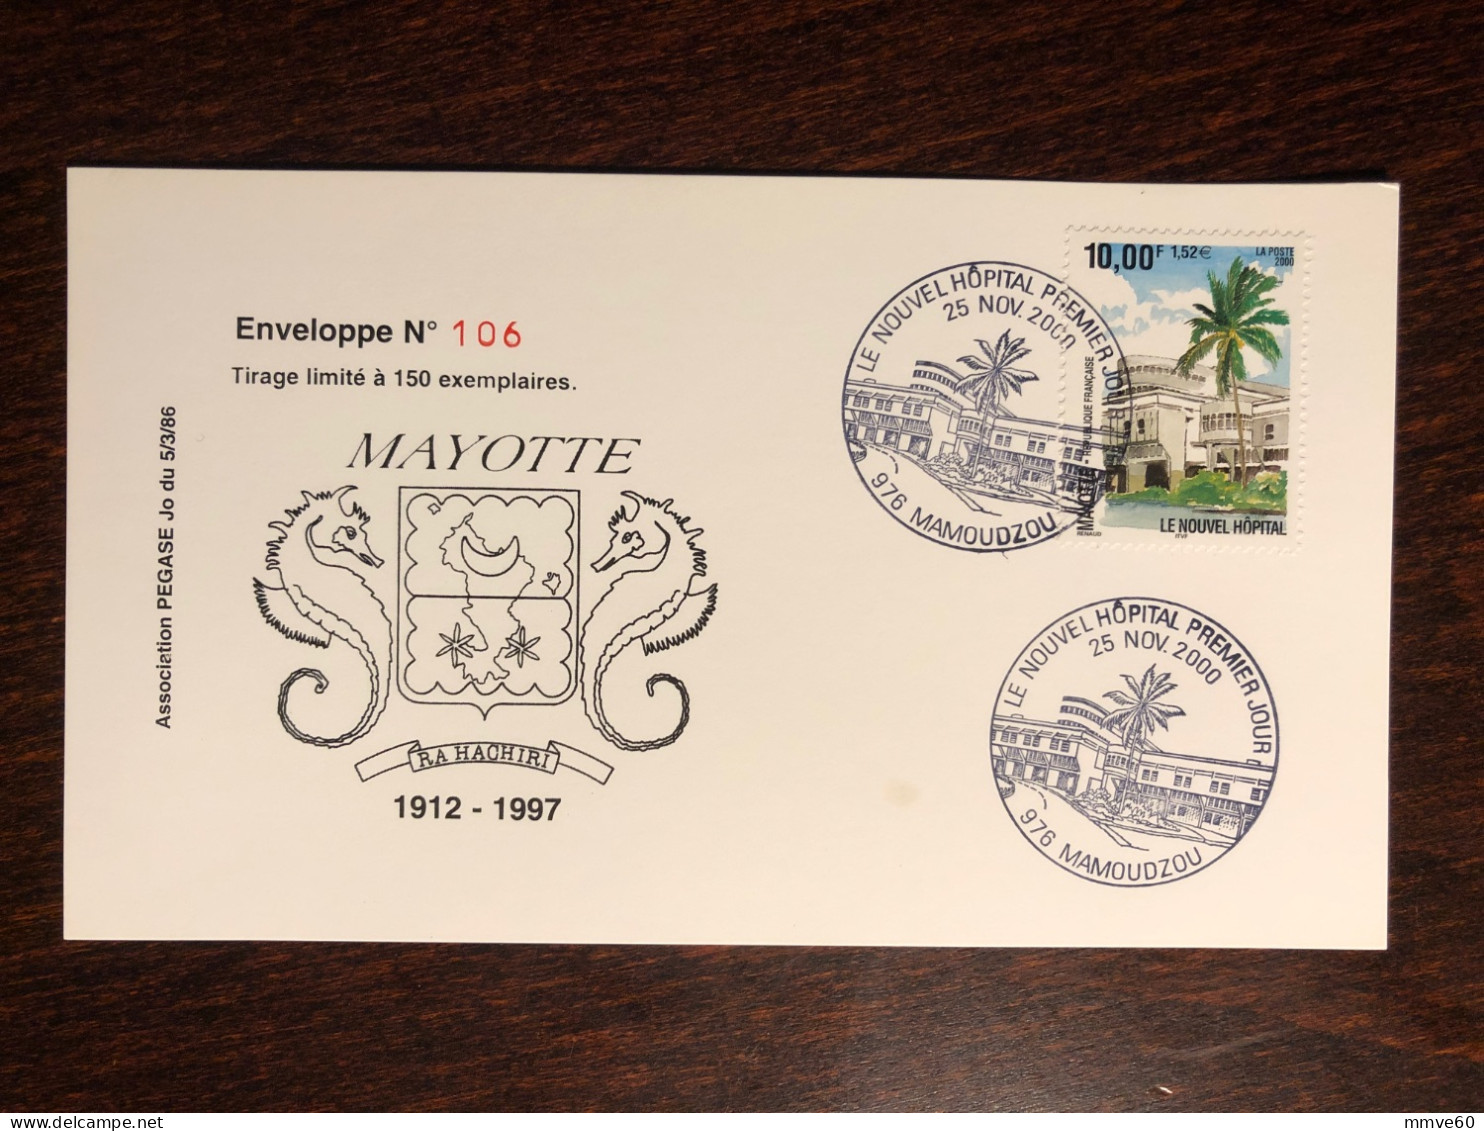 MAYOTTE  FDC CARD 1997 YEAR HOSPITAL HEALTH MEDICINE STAMPS - Covers & Documents